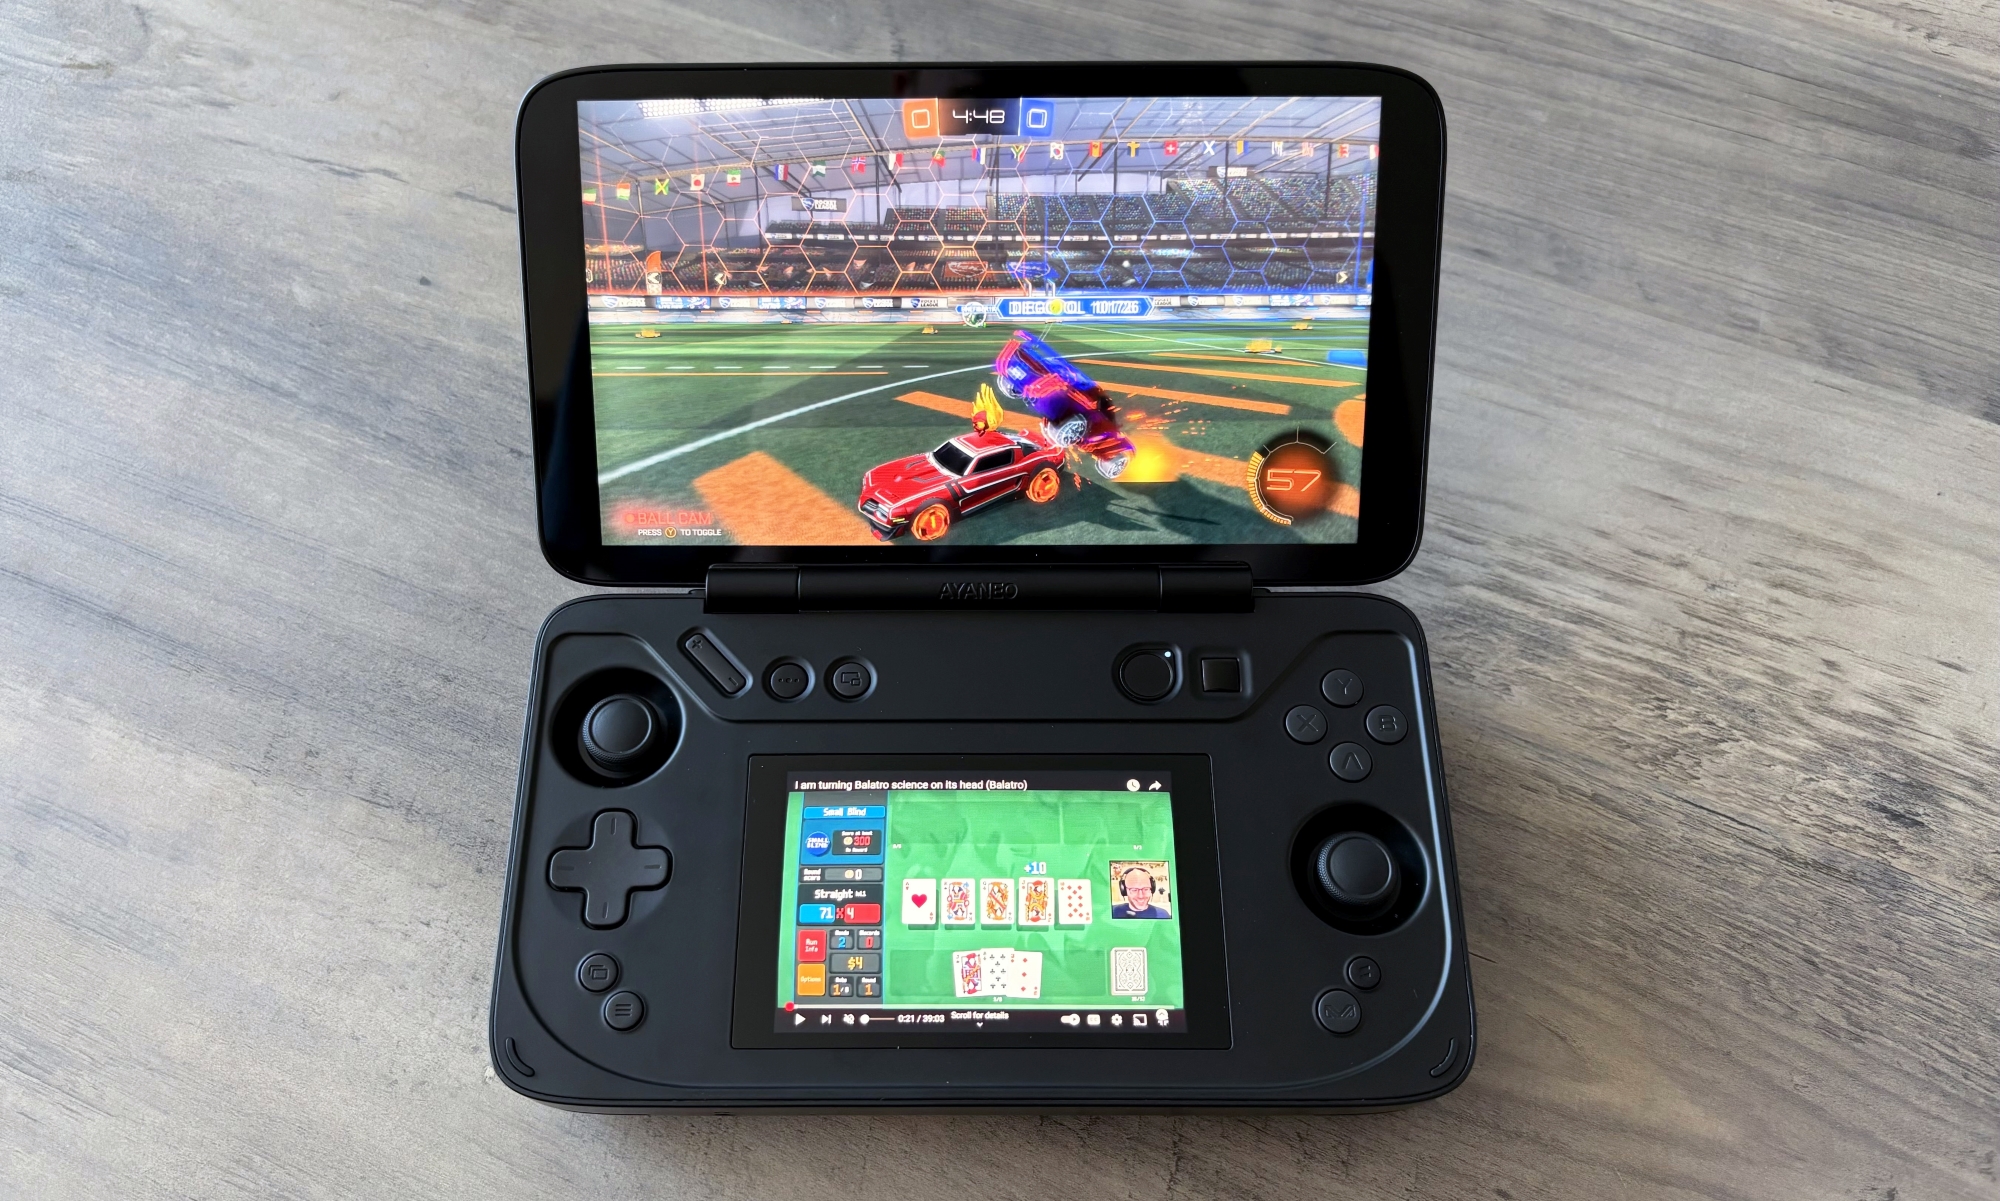 The Ayaneo Flip DS gaming handheld rests on a light brown wooden table, with its top screen showcasing the game Rocket League and its bottom screen playing a YouTube video.